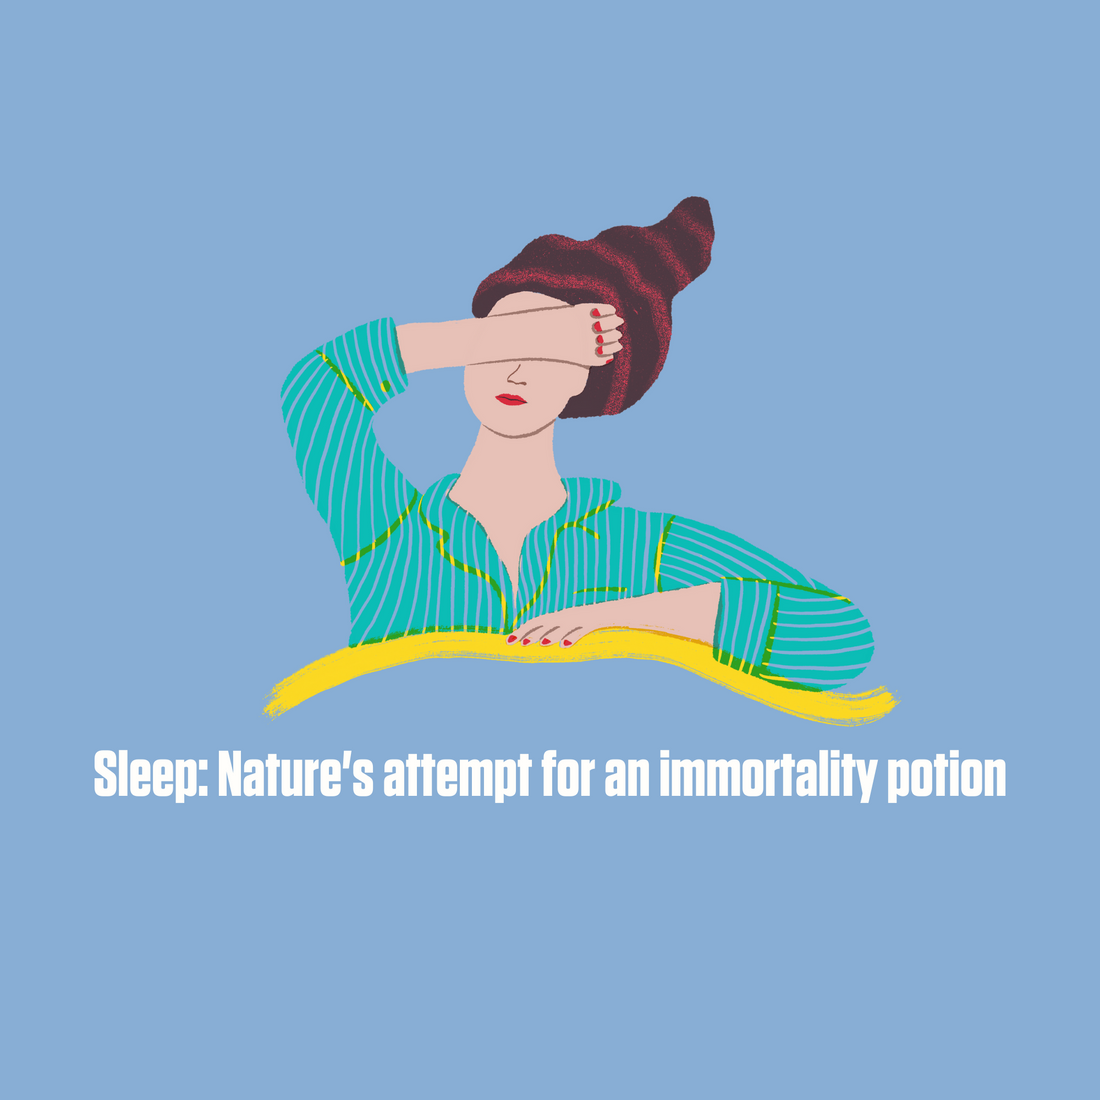 Sleep: nature's attempt for an immortality potion